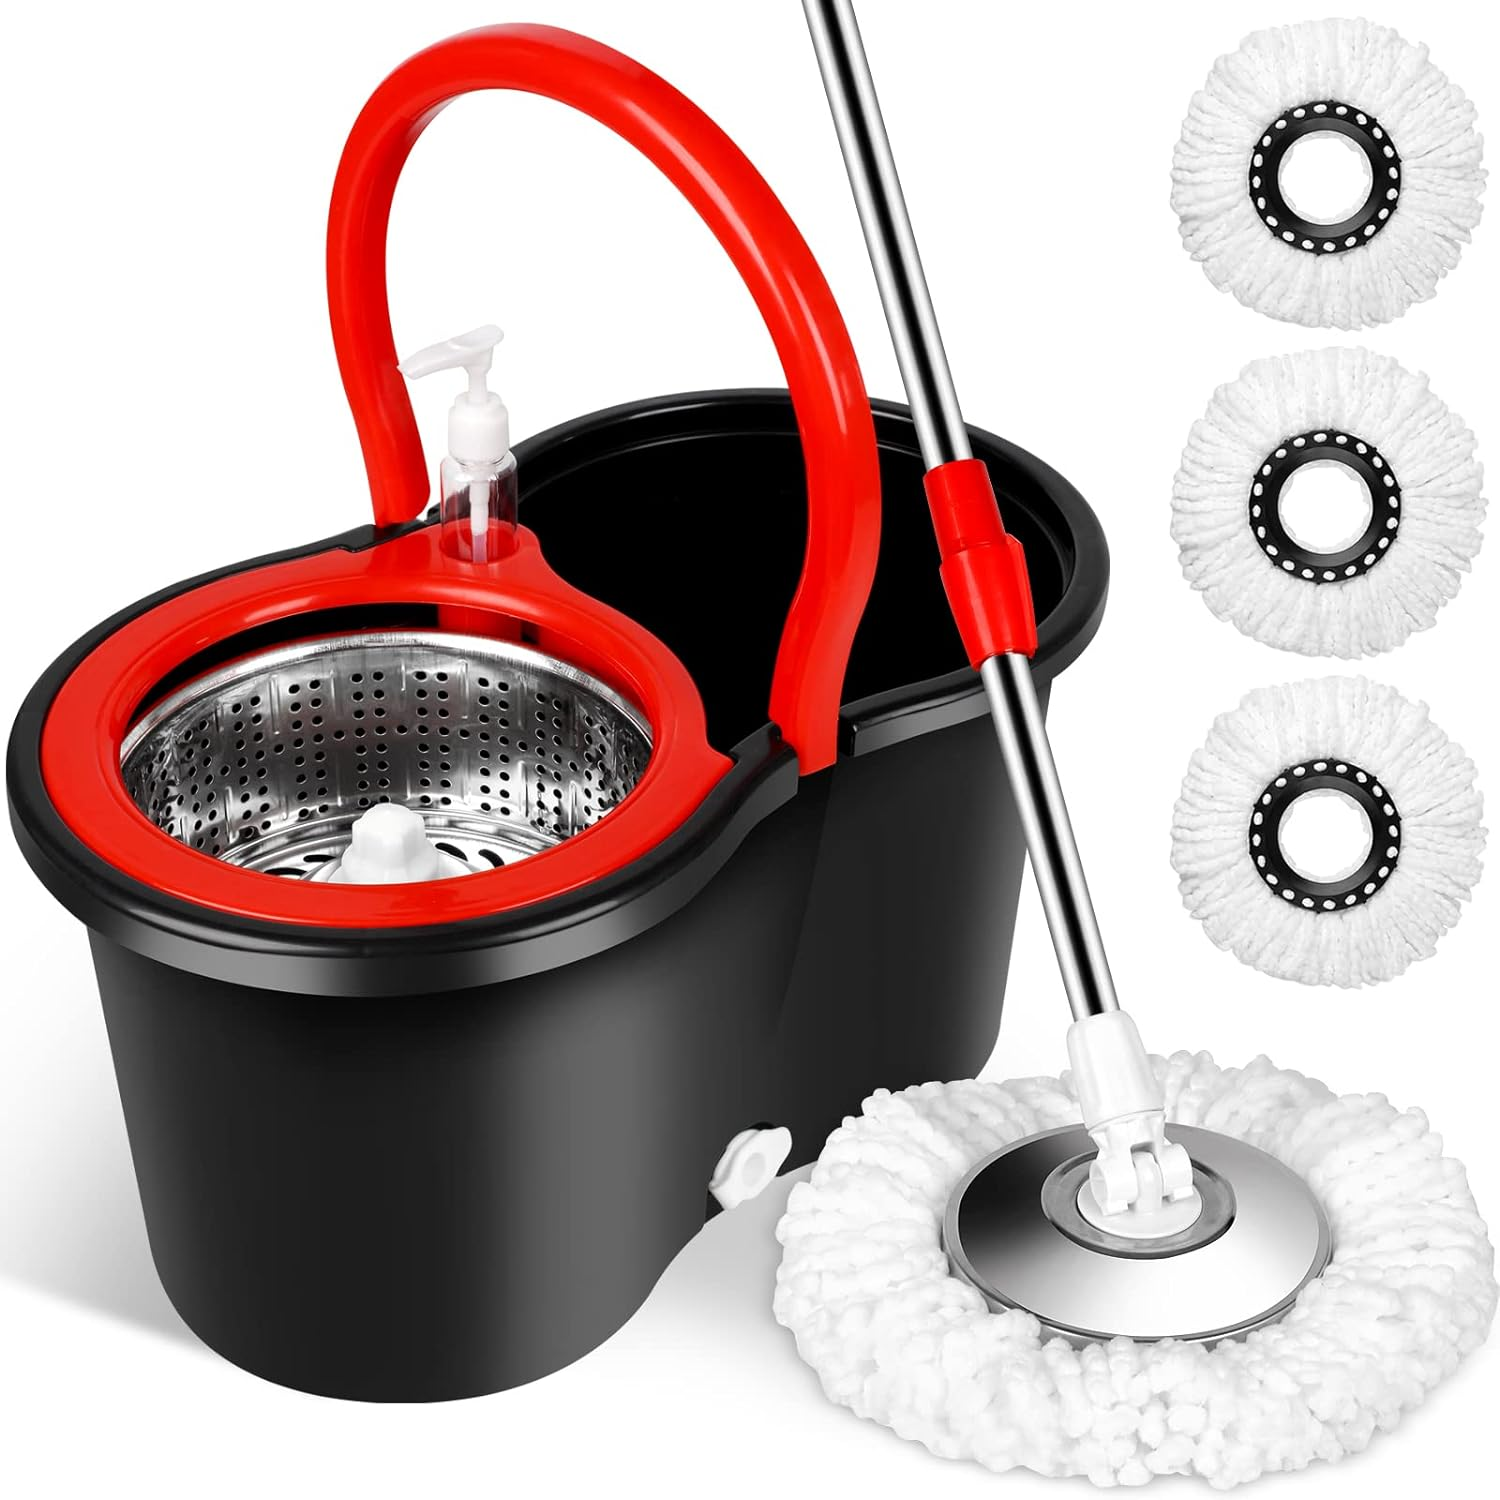 Spin Mop and Bucket with Wringer Set, 360° Rotating Head Mop Bucket System,  3 Microfiber Mop Heads for Floor Cleaning (Black & Red)